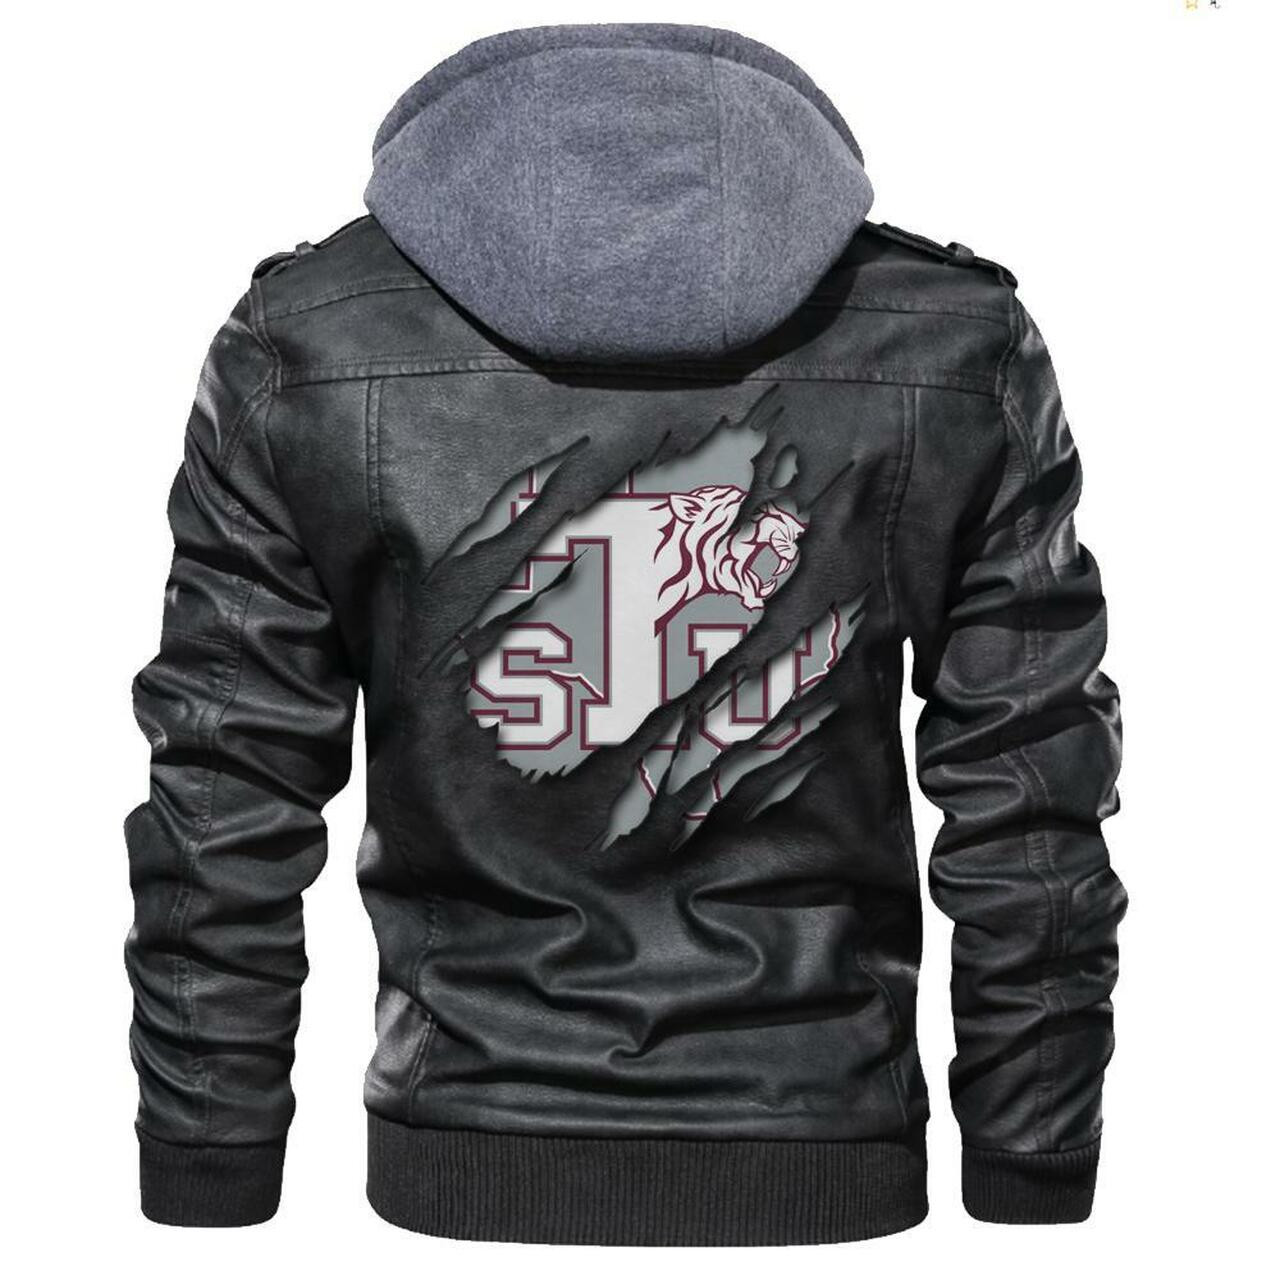 Are you looking for a great leather jacket? 164